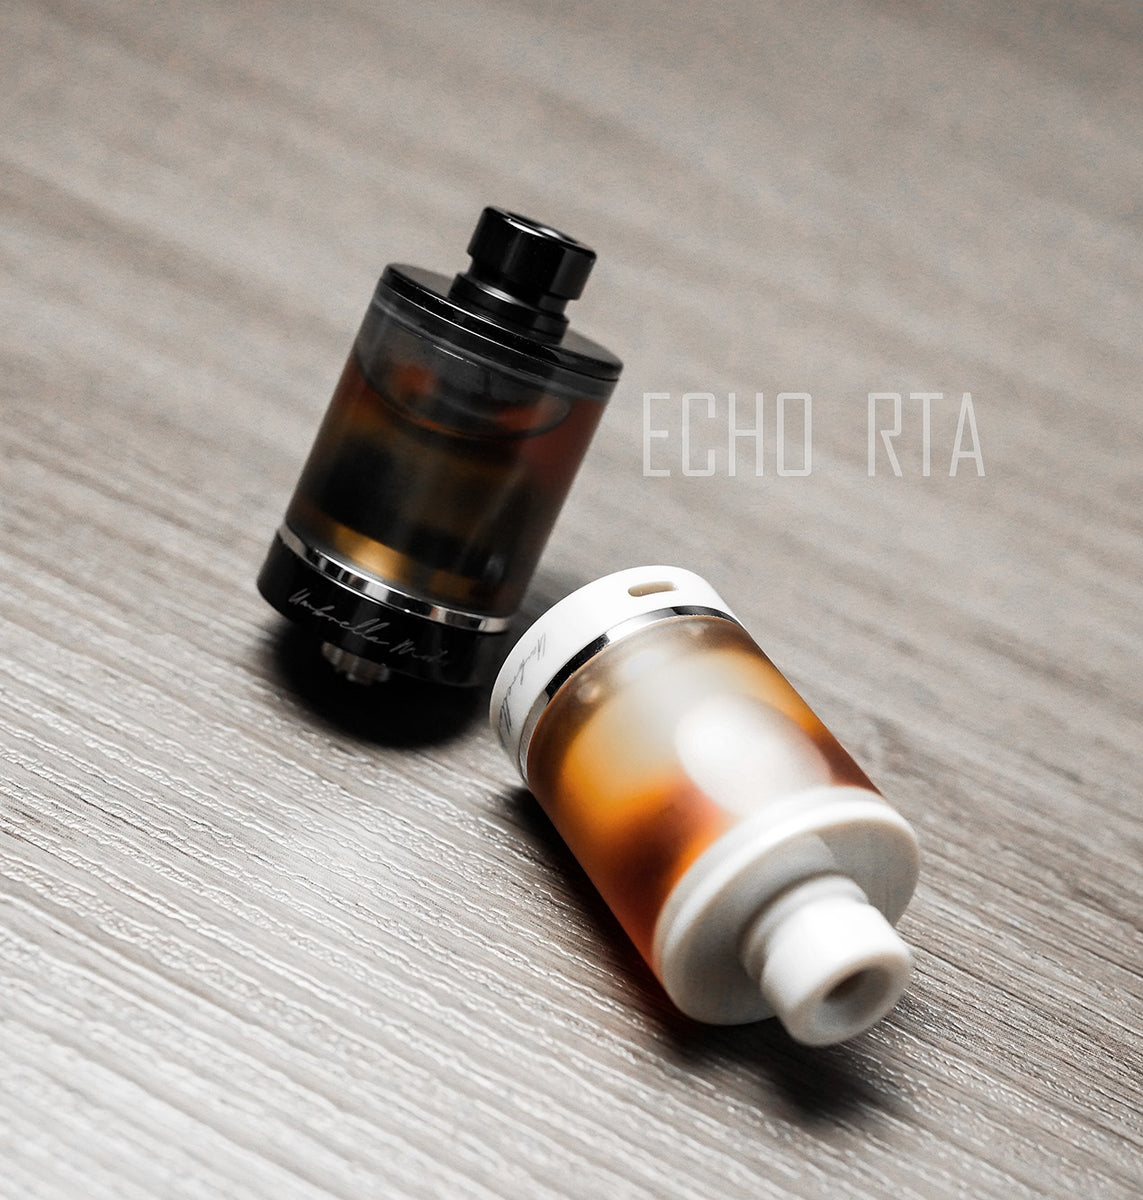 Echo RTA by Umbrella Mods with gold deck